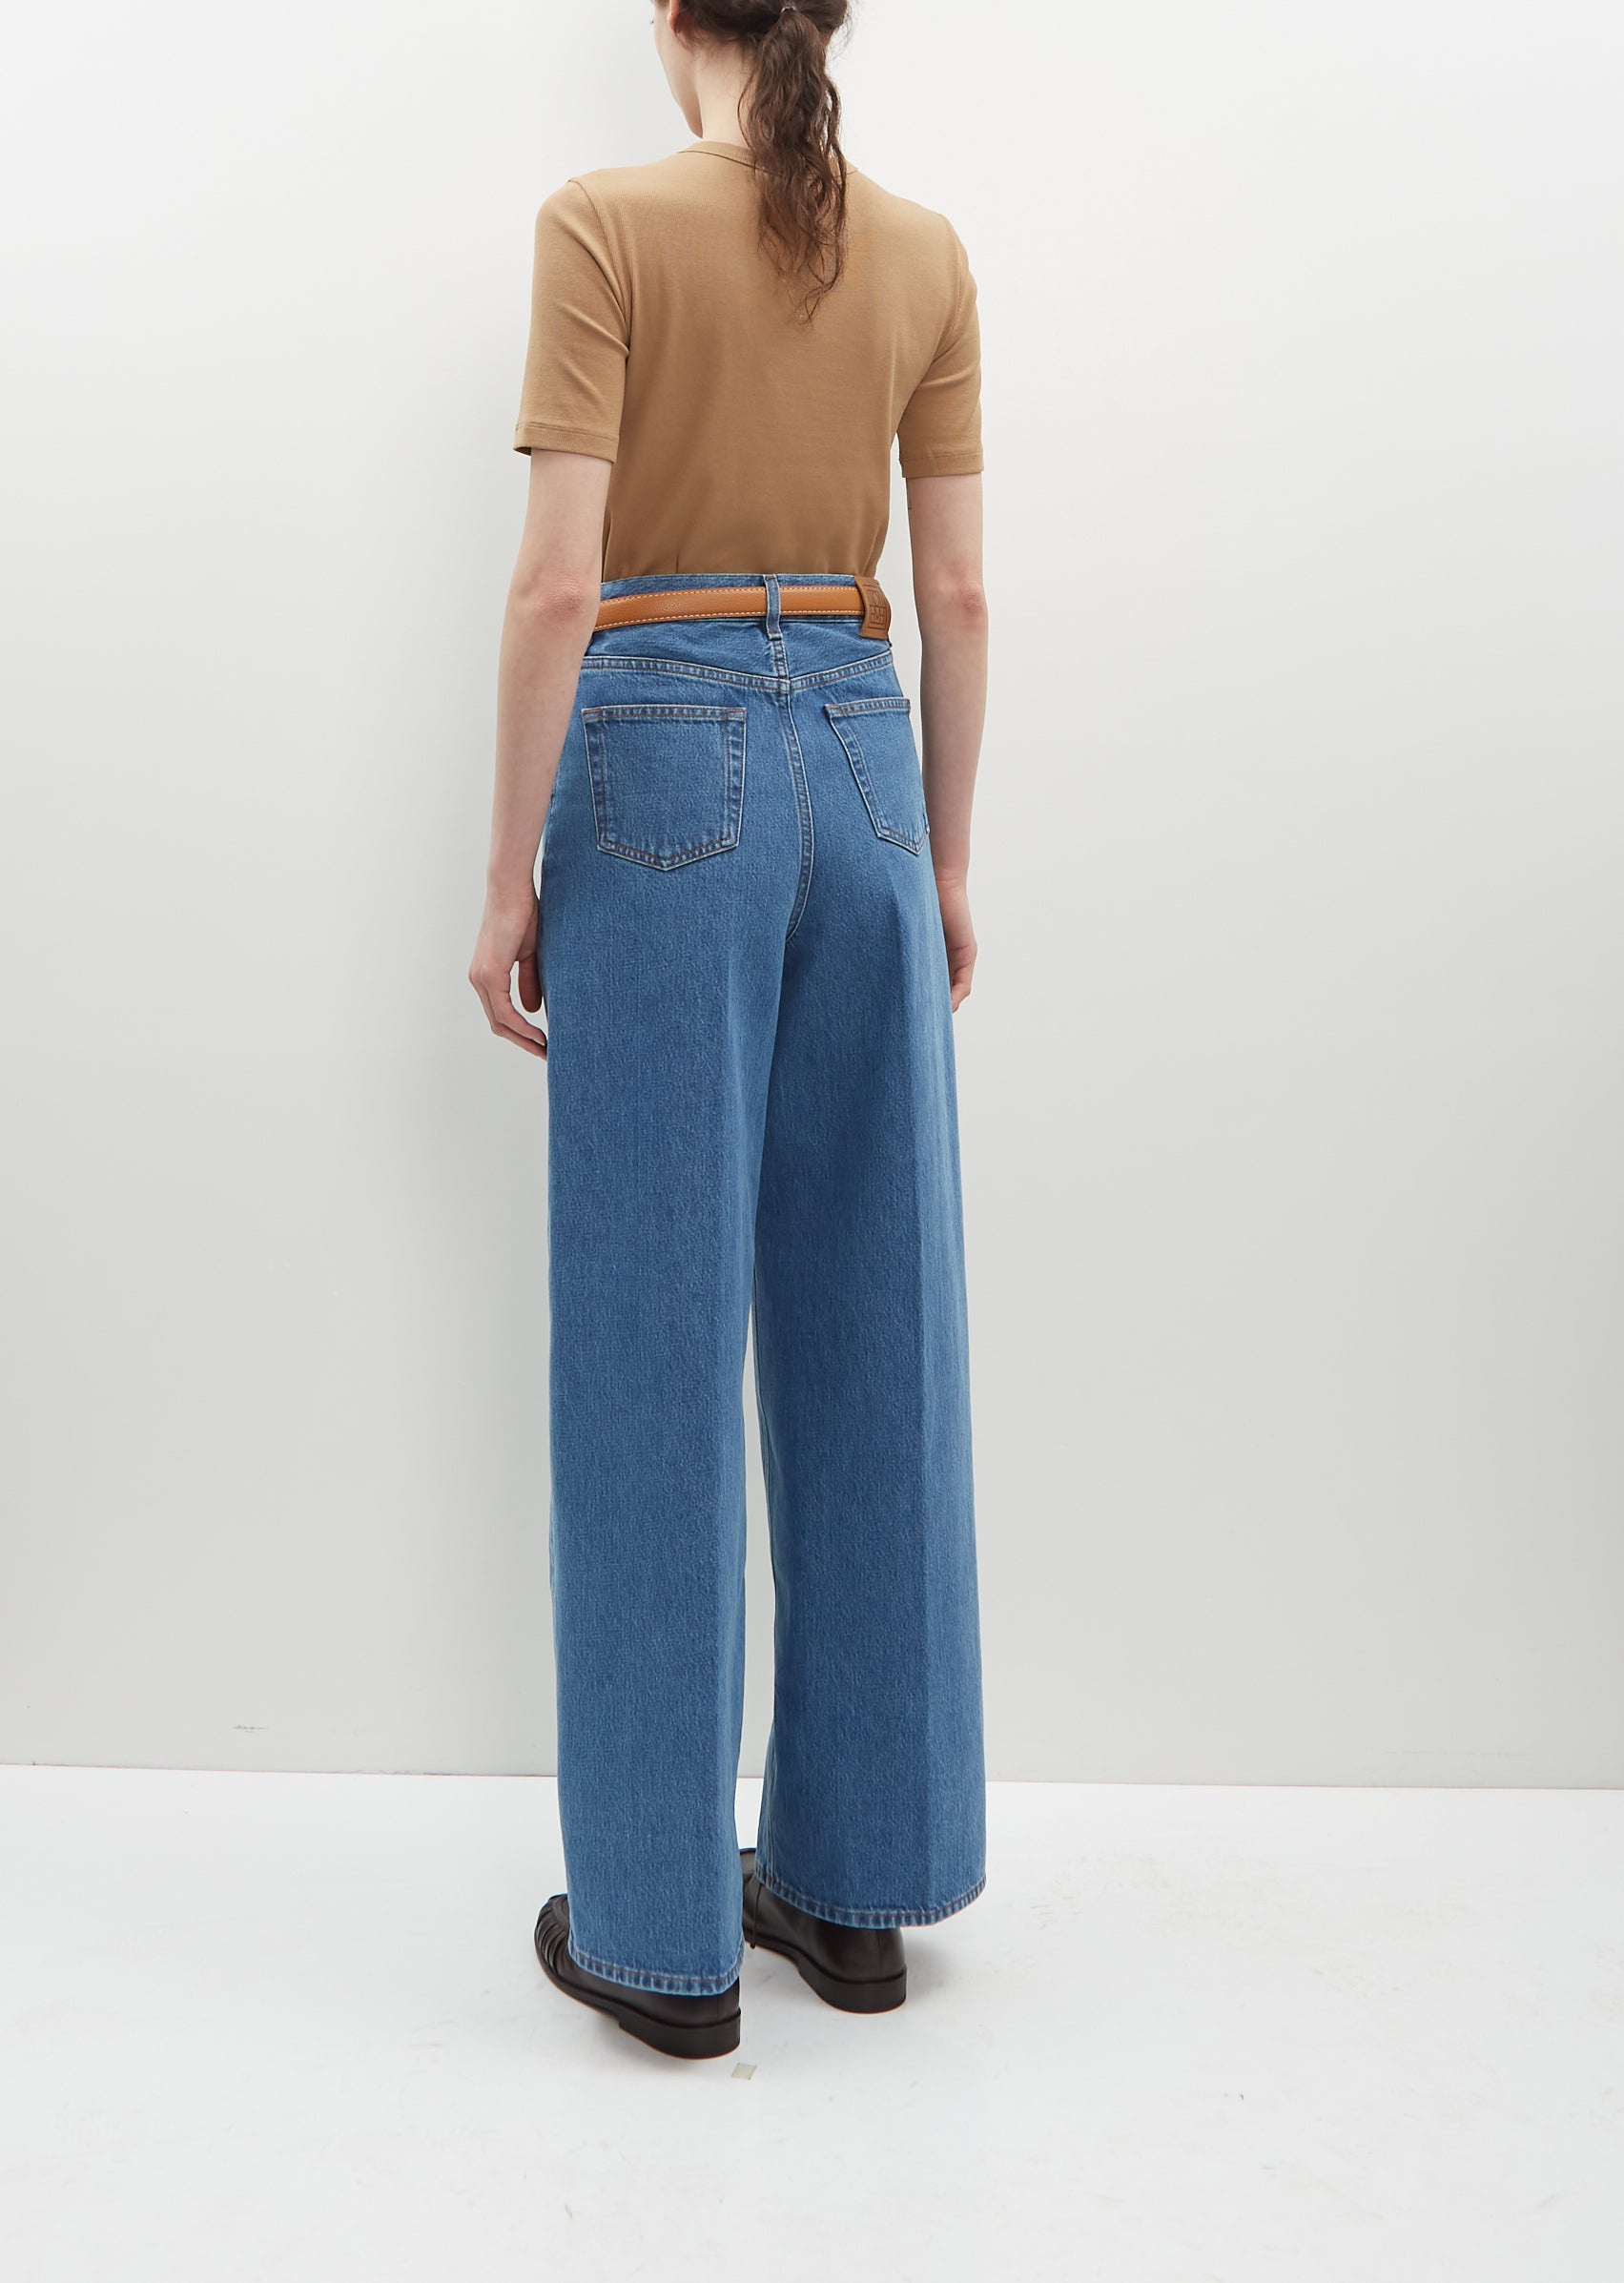 Shop Wide Fit Solid Denim Palazzo Pants with Front-Knot Styling Online |  Max UAE